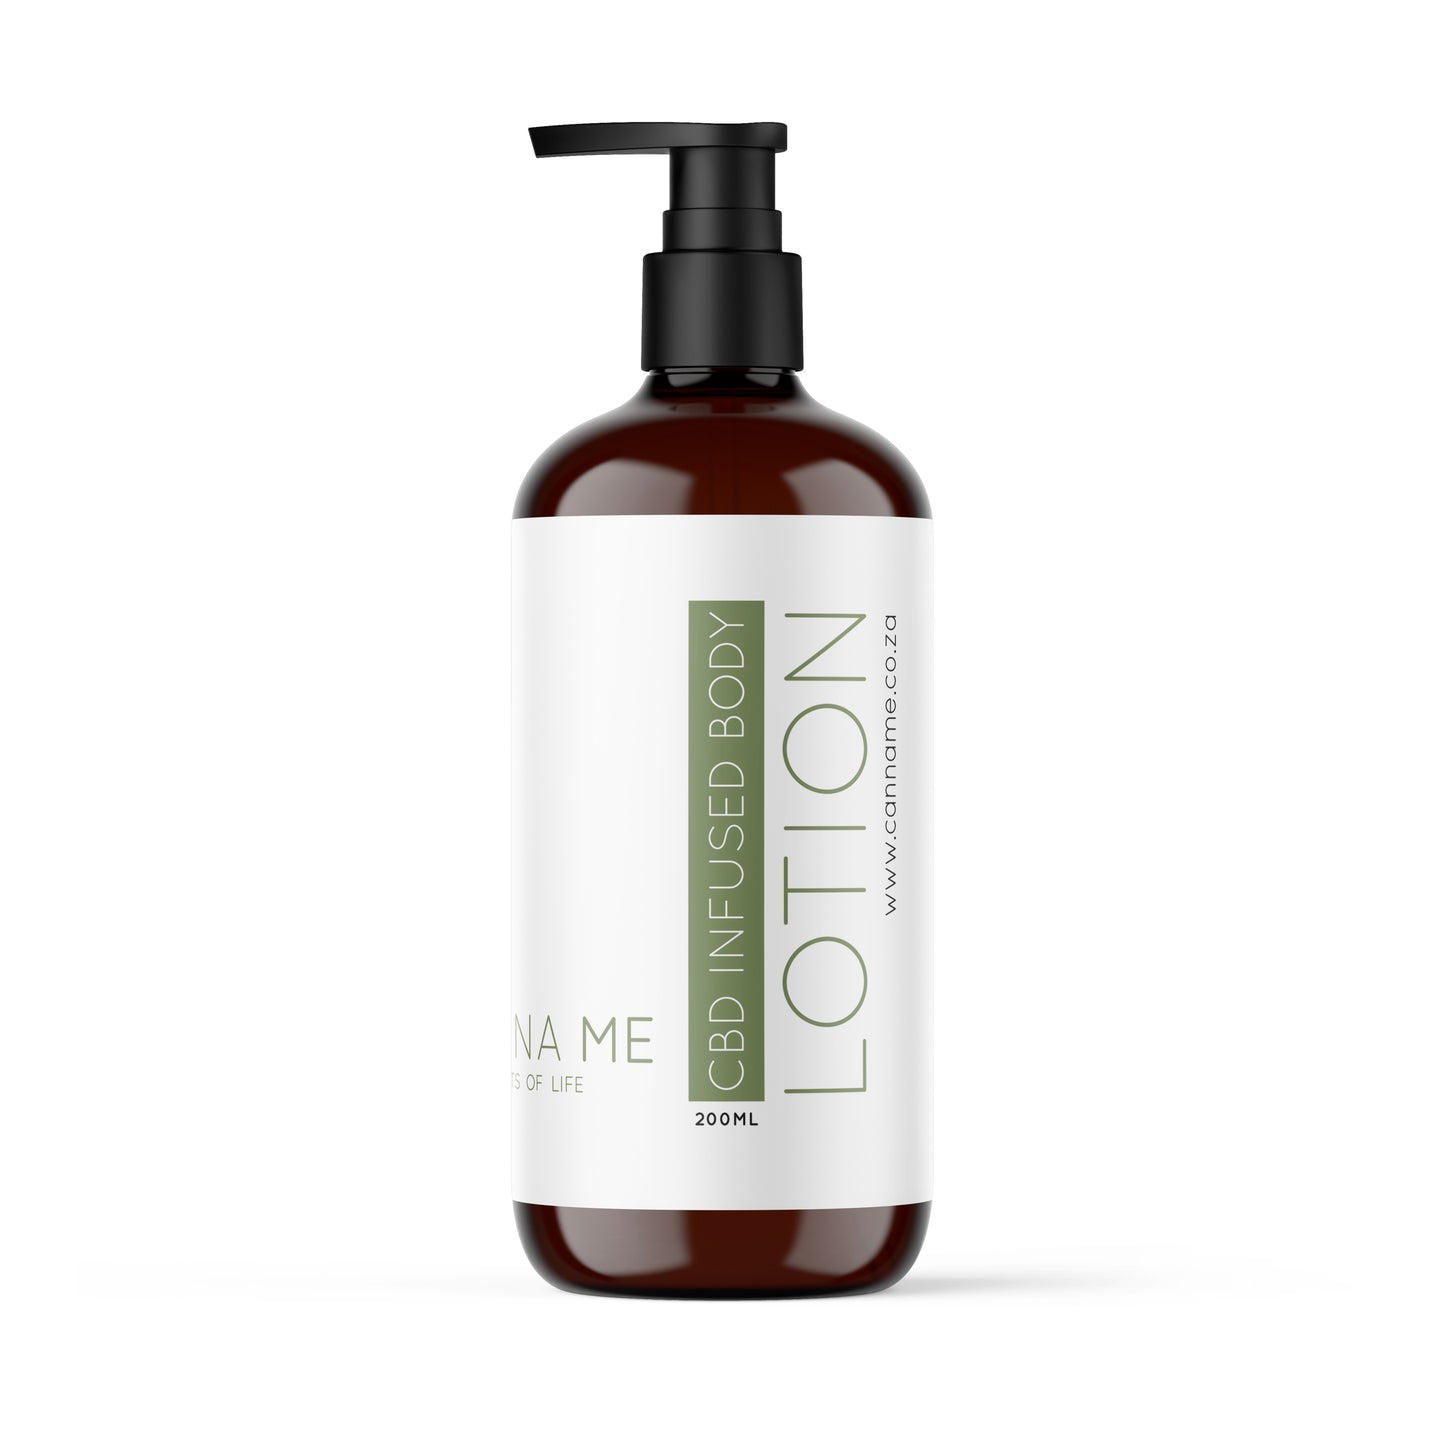 CBD infused body lotion